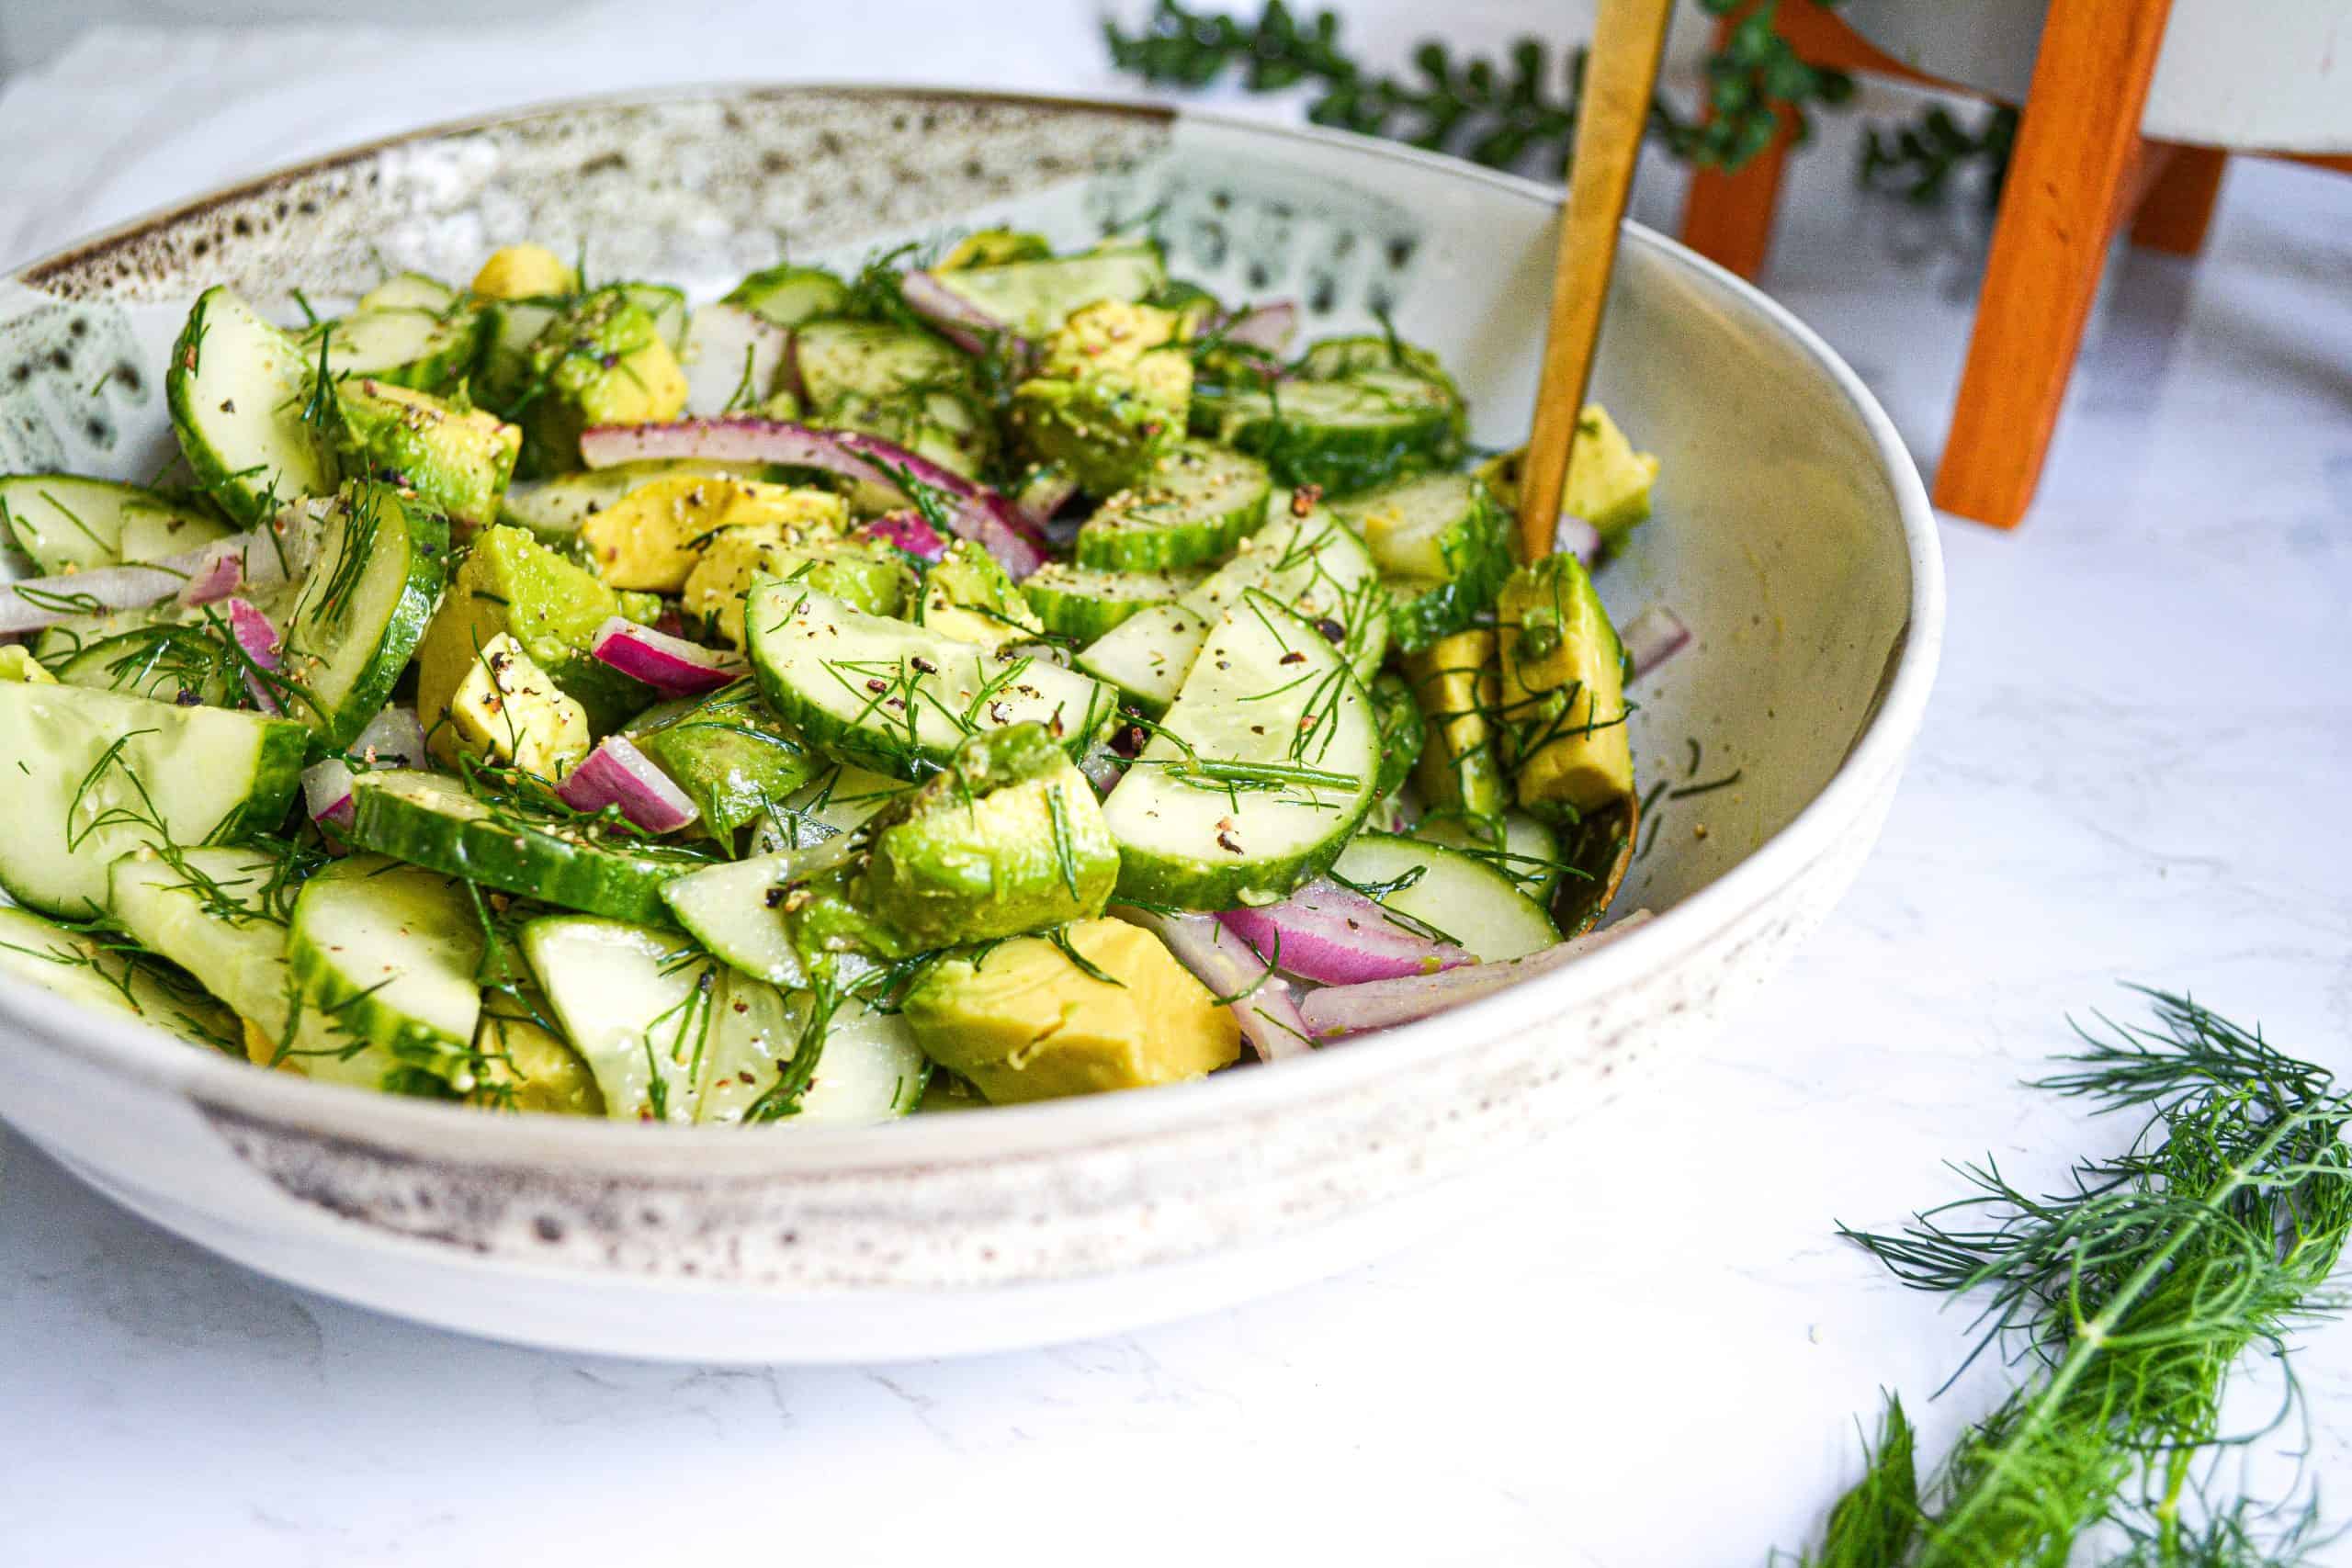 15-Minute Cucumber and Avocado Salad